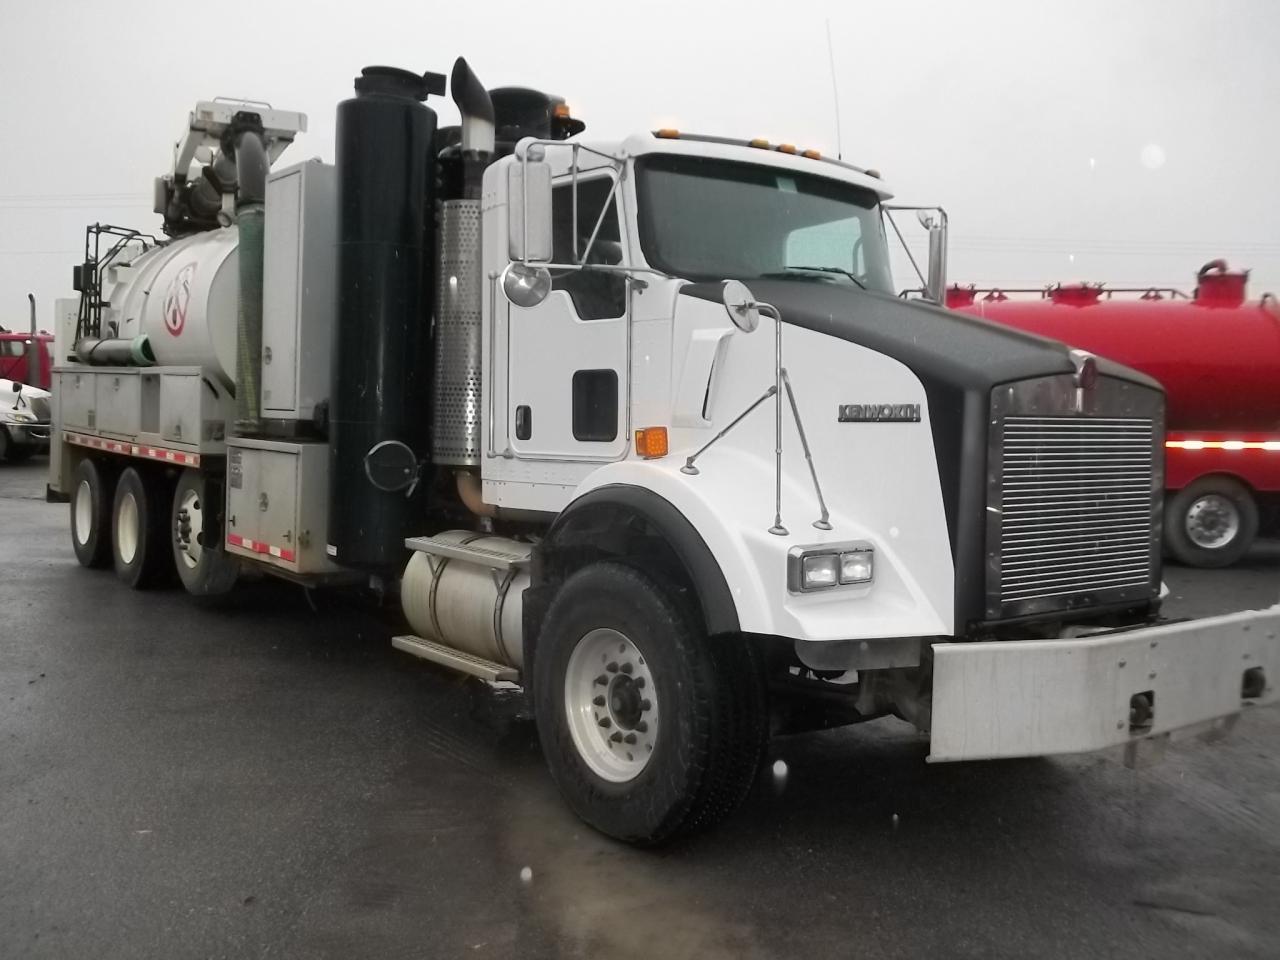 Used 2011 KENWORTH T800 For Sale in Caledonia, NY 14423 Grape 4.9